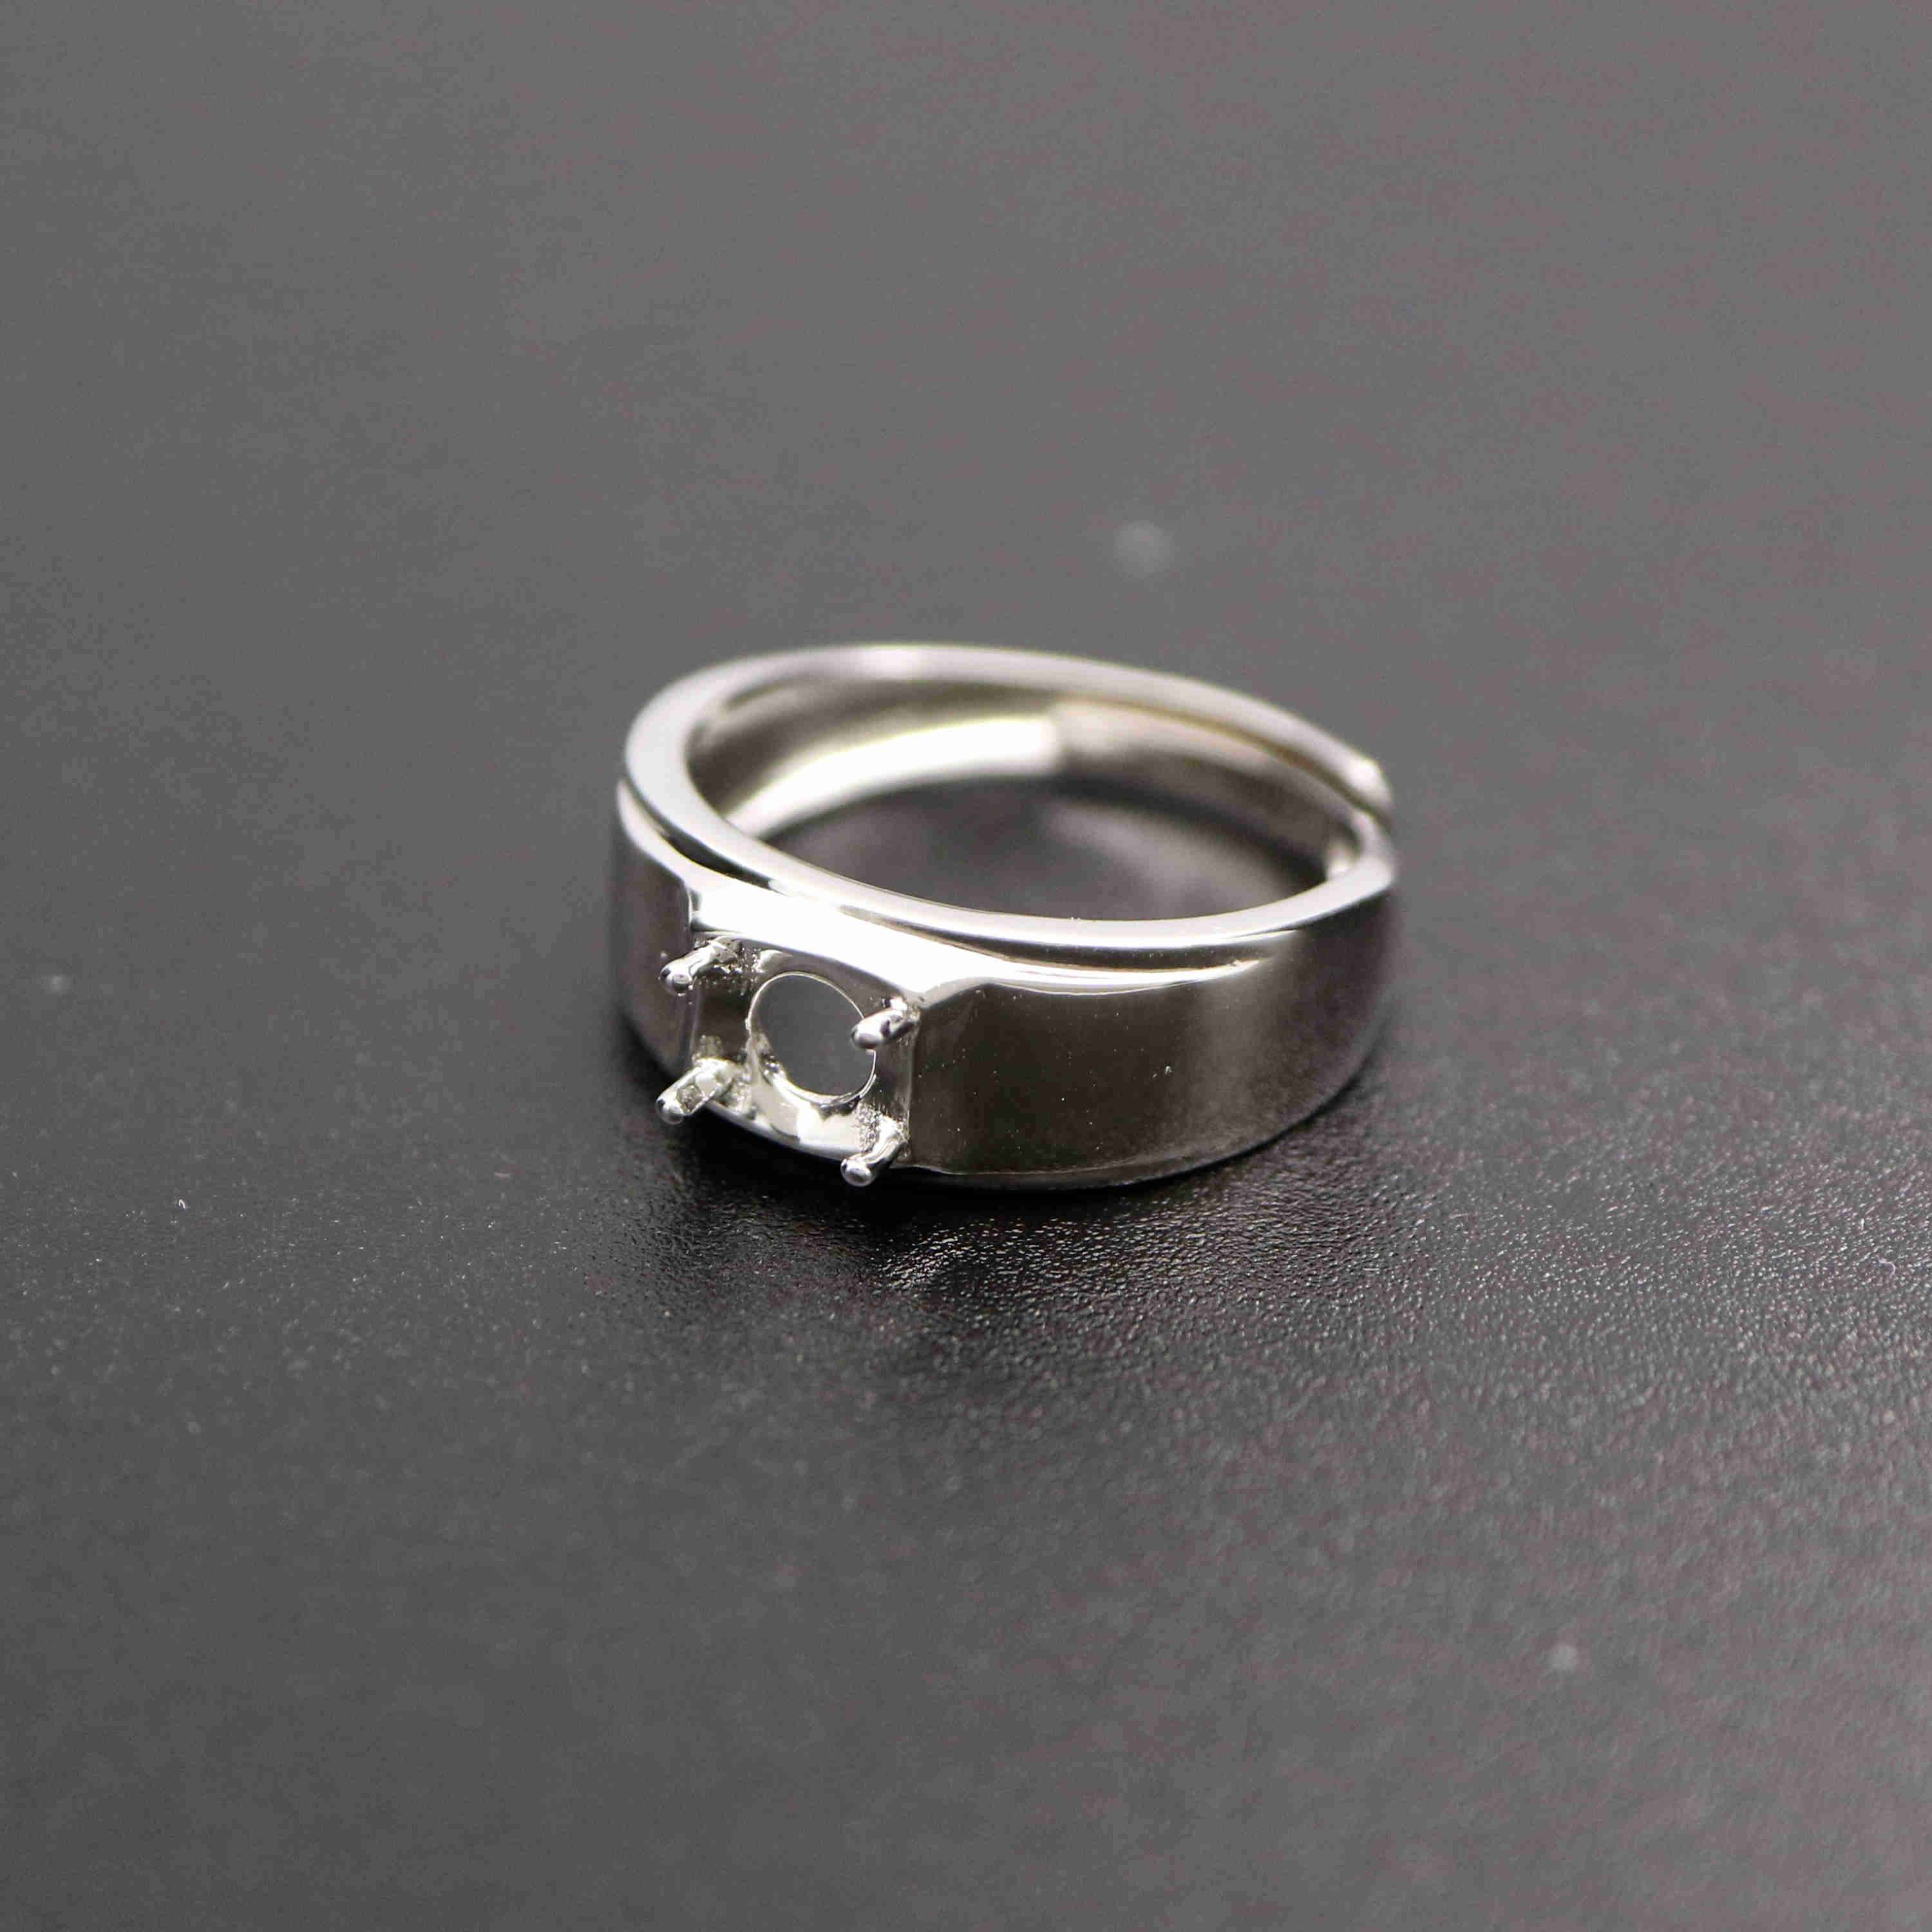 1Pcs 5-9MM Round Gems Cz Stone Prong Setting Solid 925 Sterling Silver Bezel Tray DIY Adjustable Ring Settings For Men 1214020 - Click Image to Close